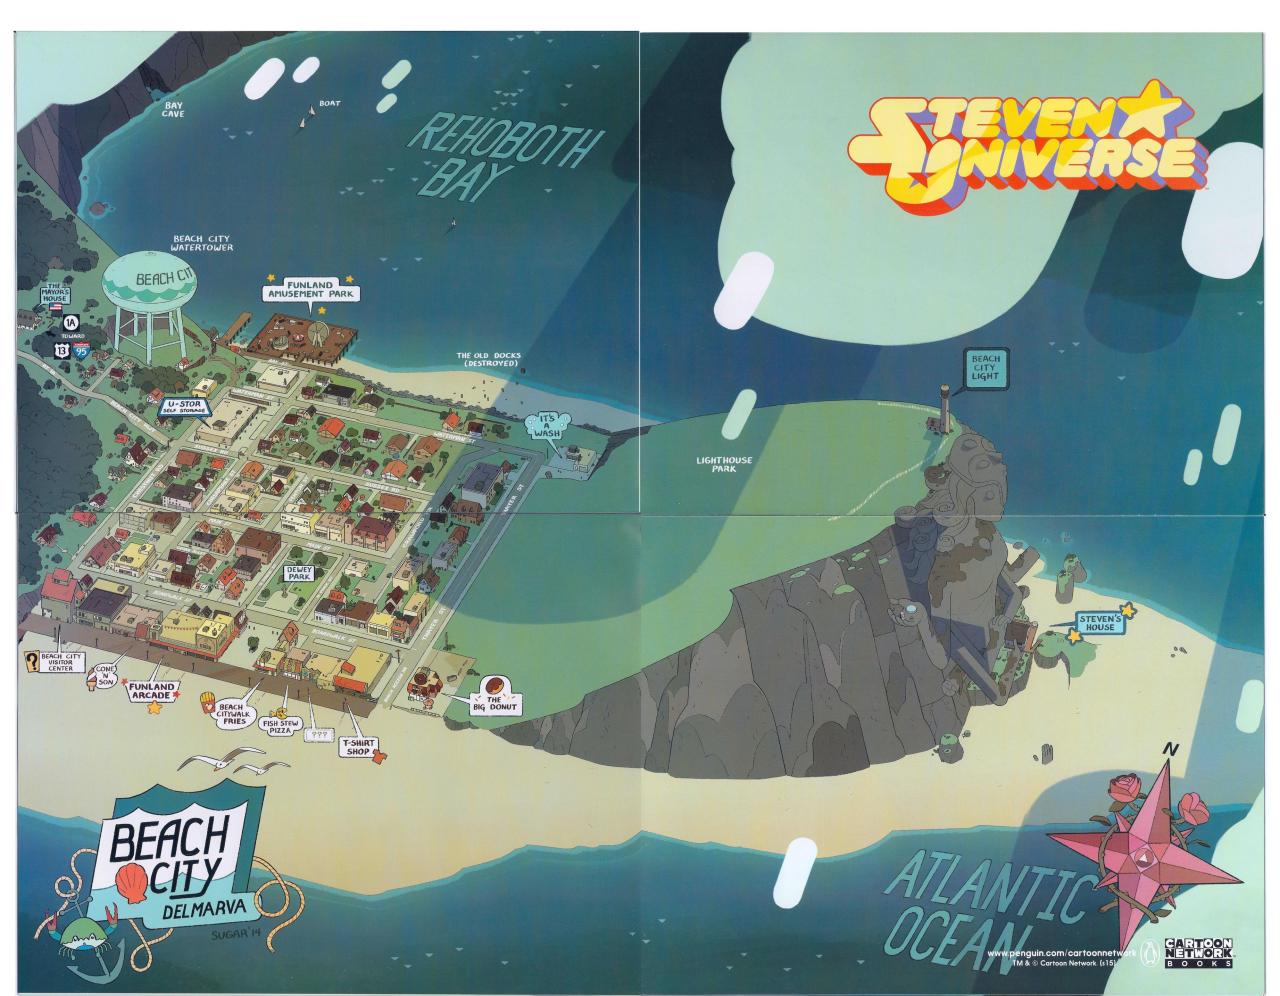 rem-zel:  Beach City map from New York Comic Con 